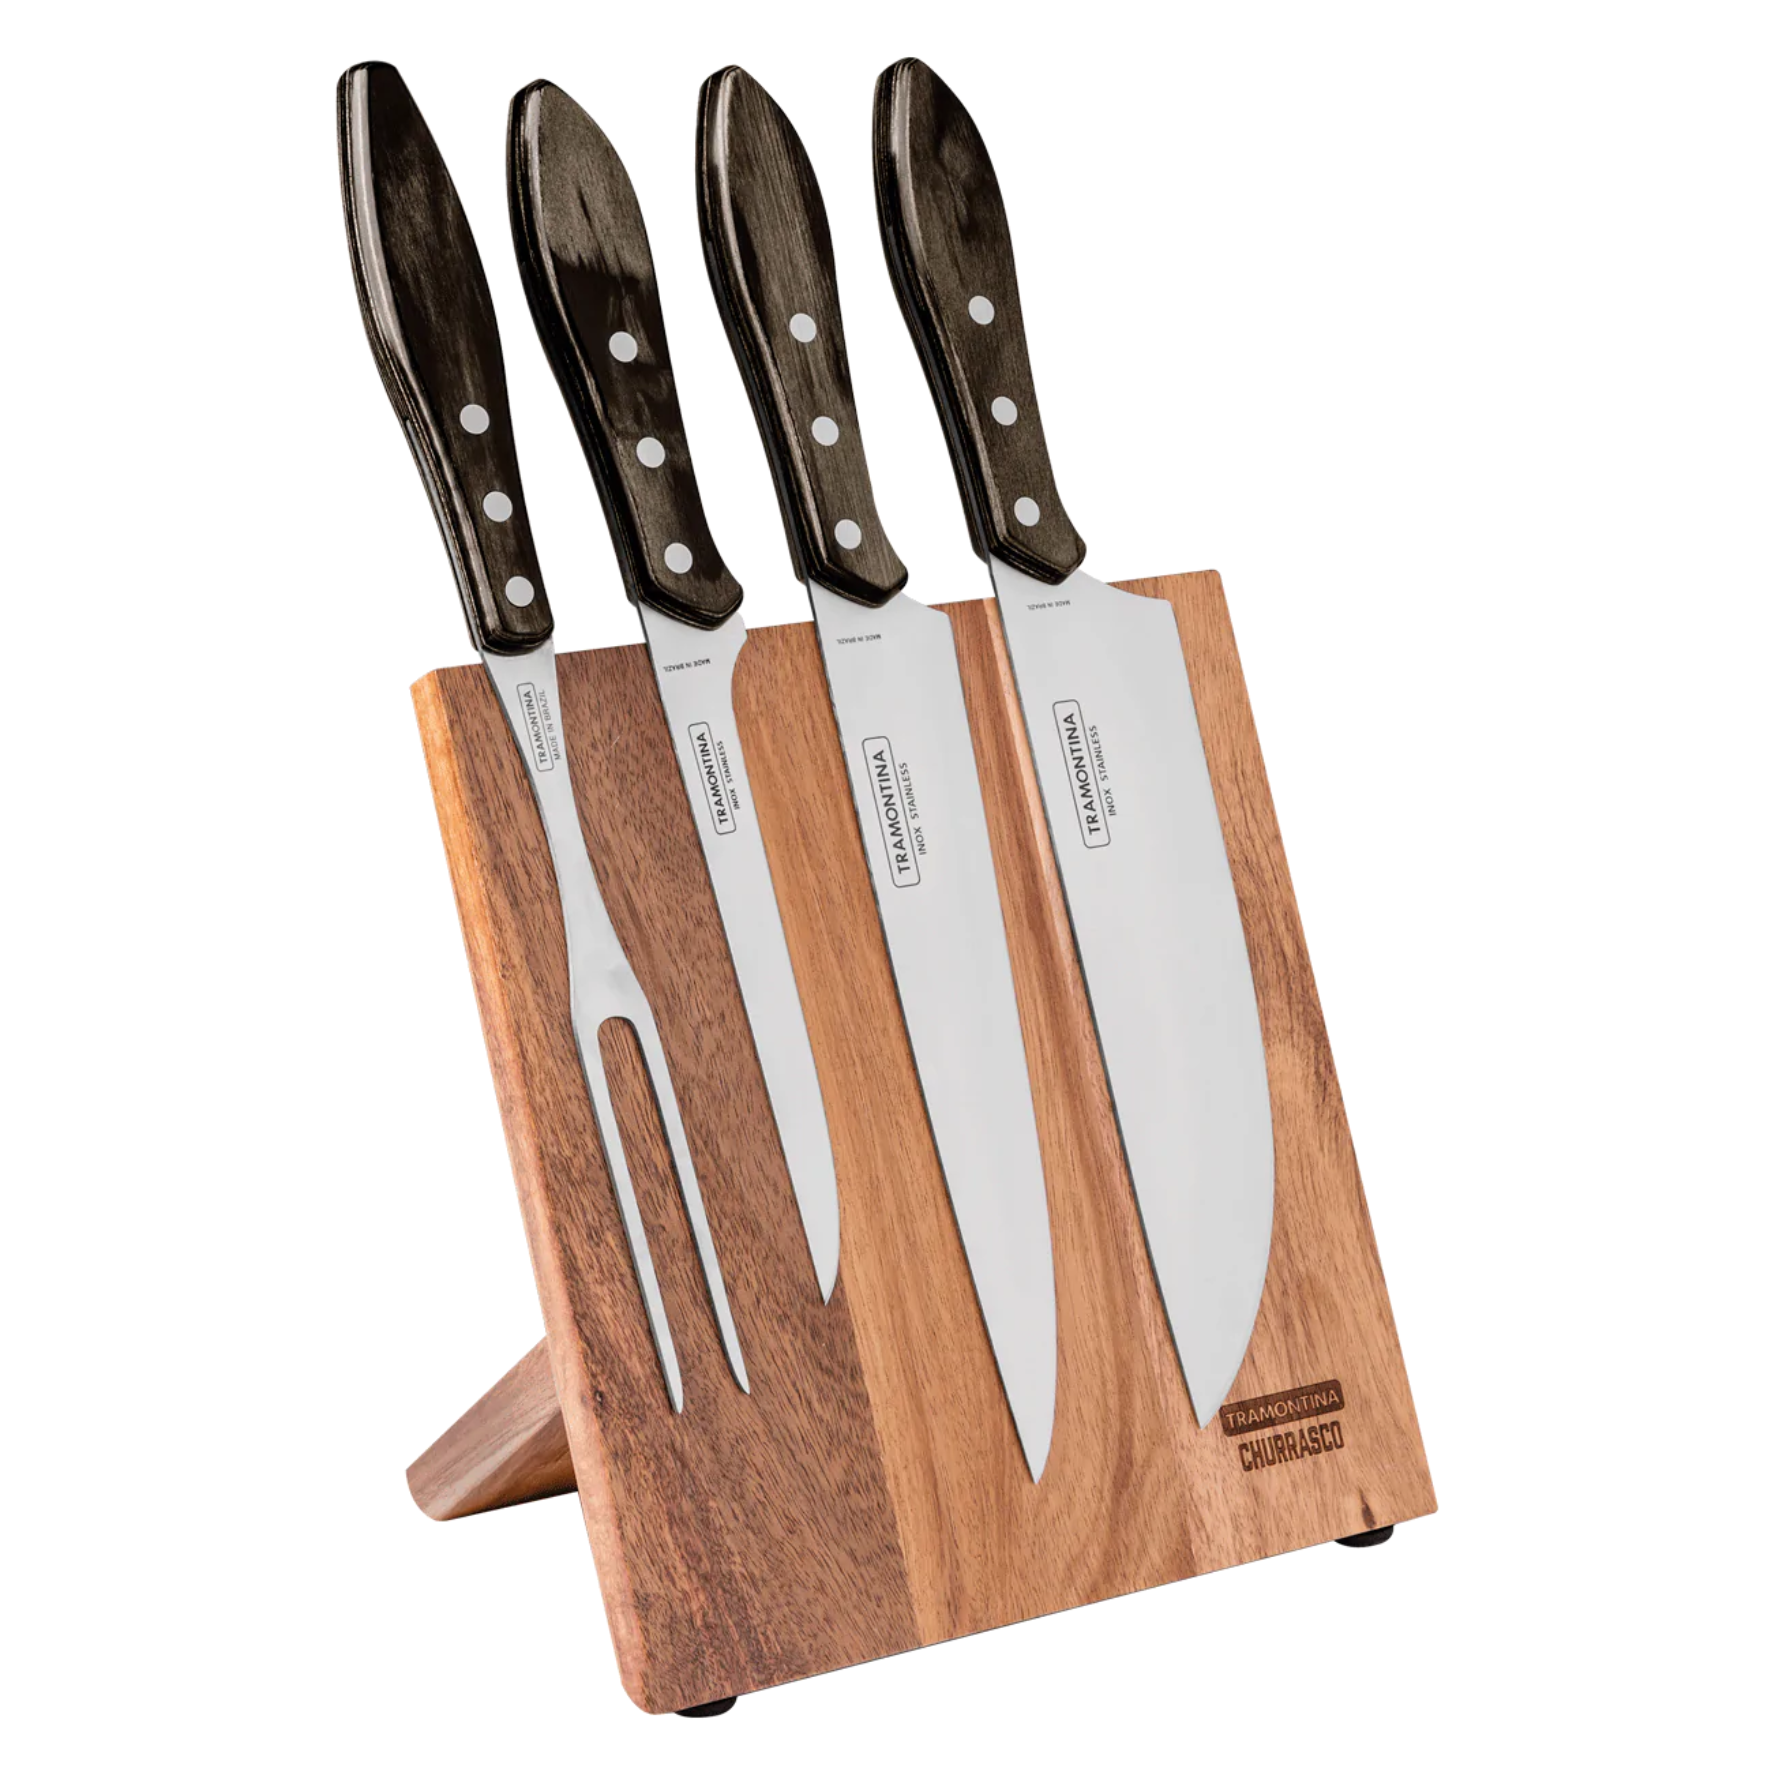 Churrasco Barbecue 5pce Knife Set with Magnetic Block 21198/981 by Tramontina